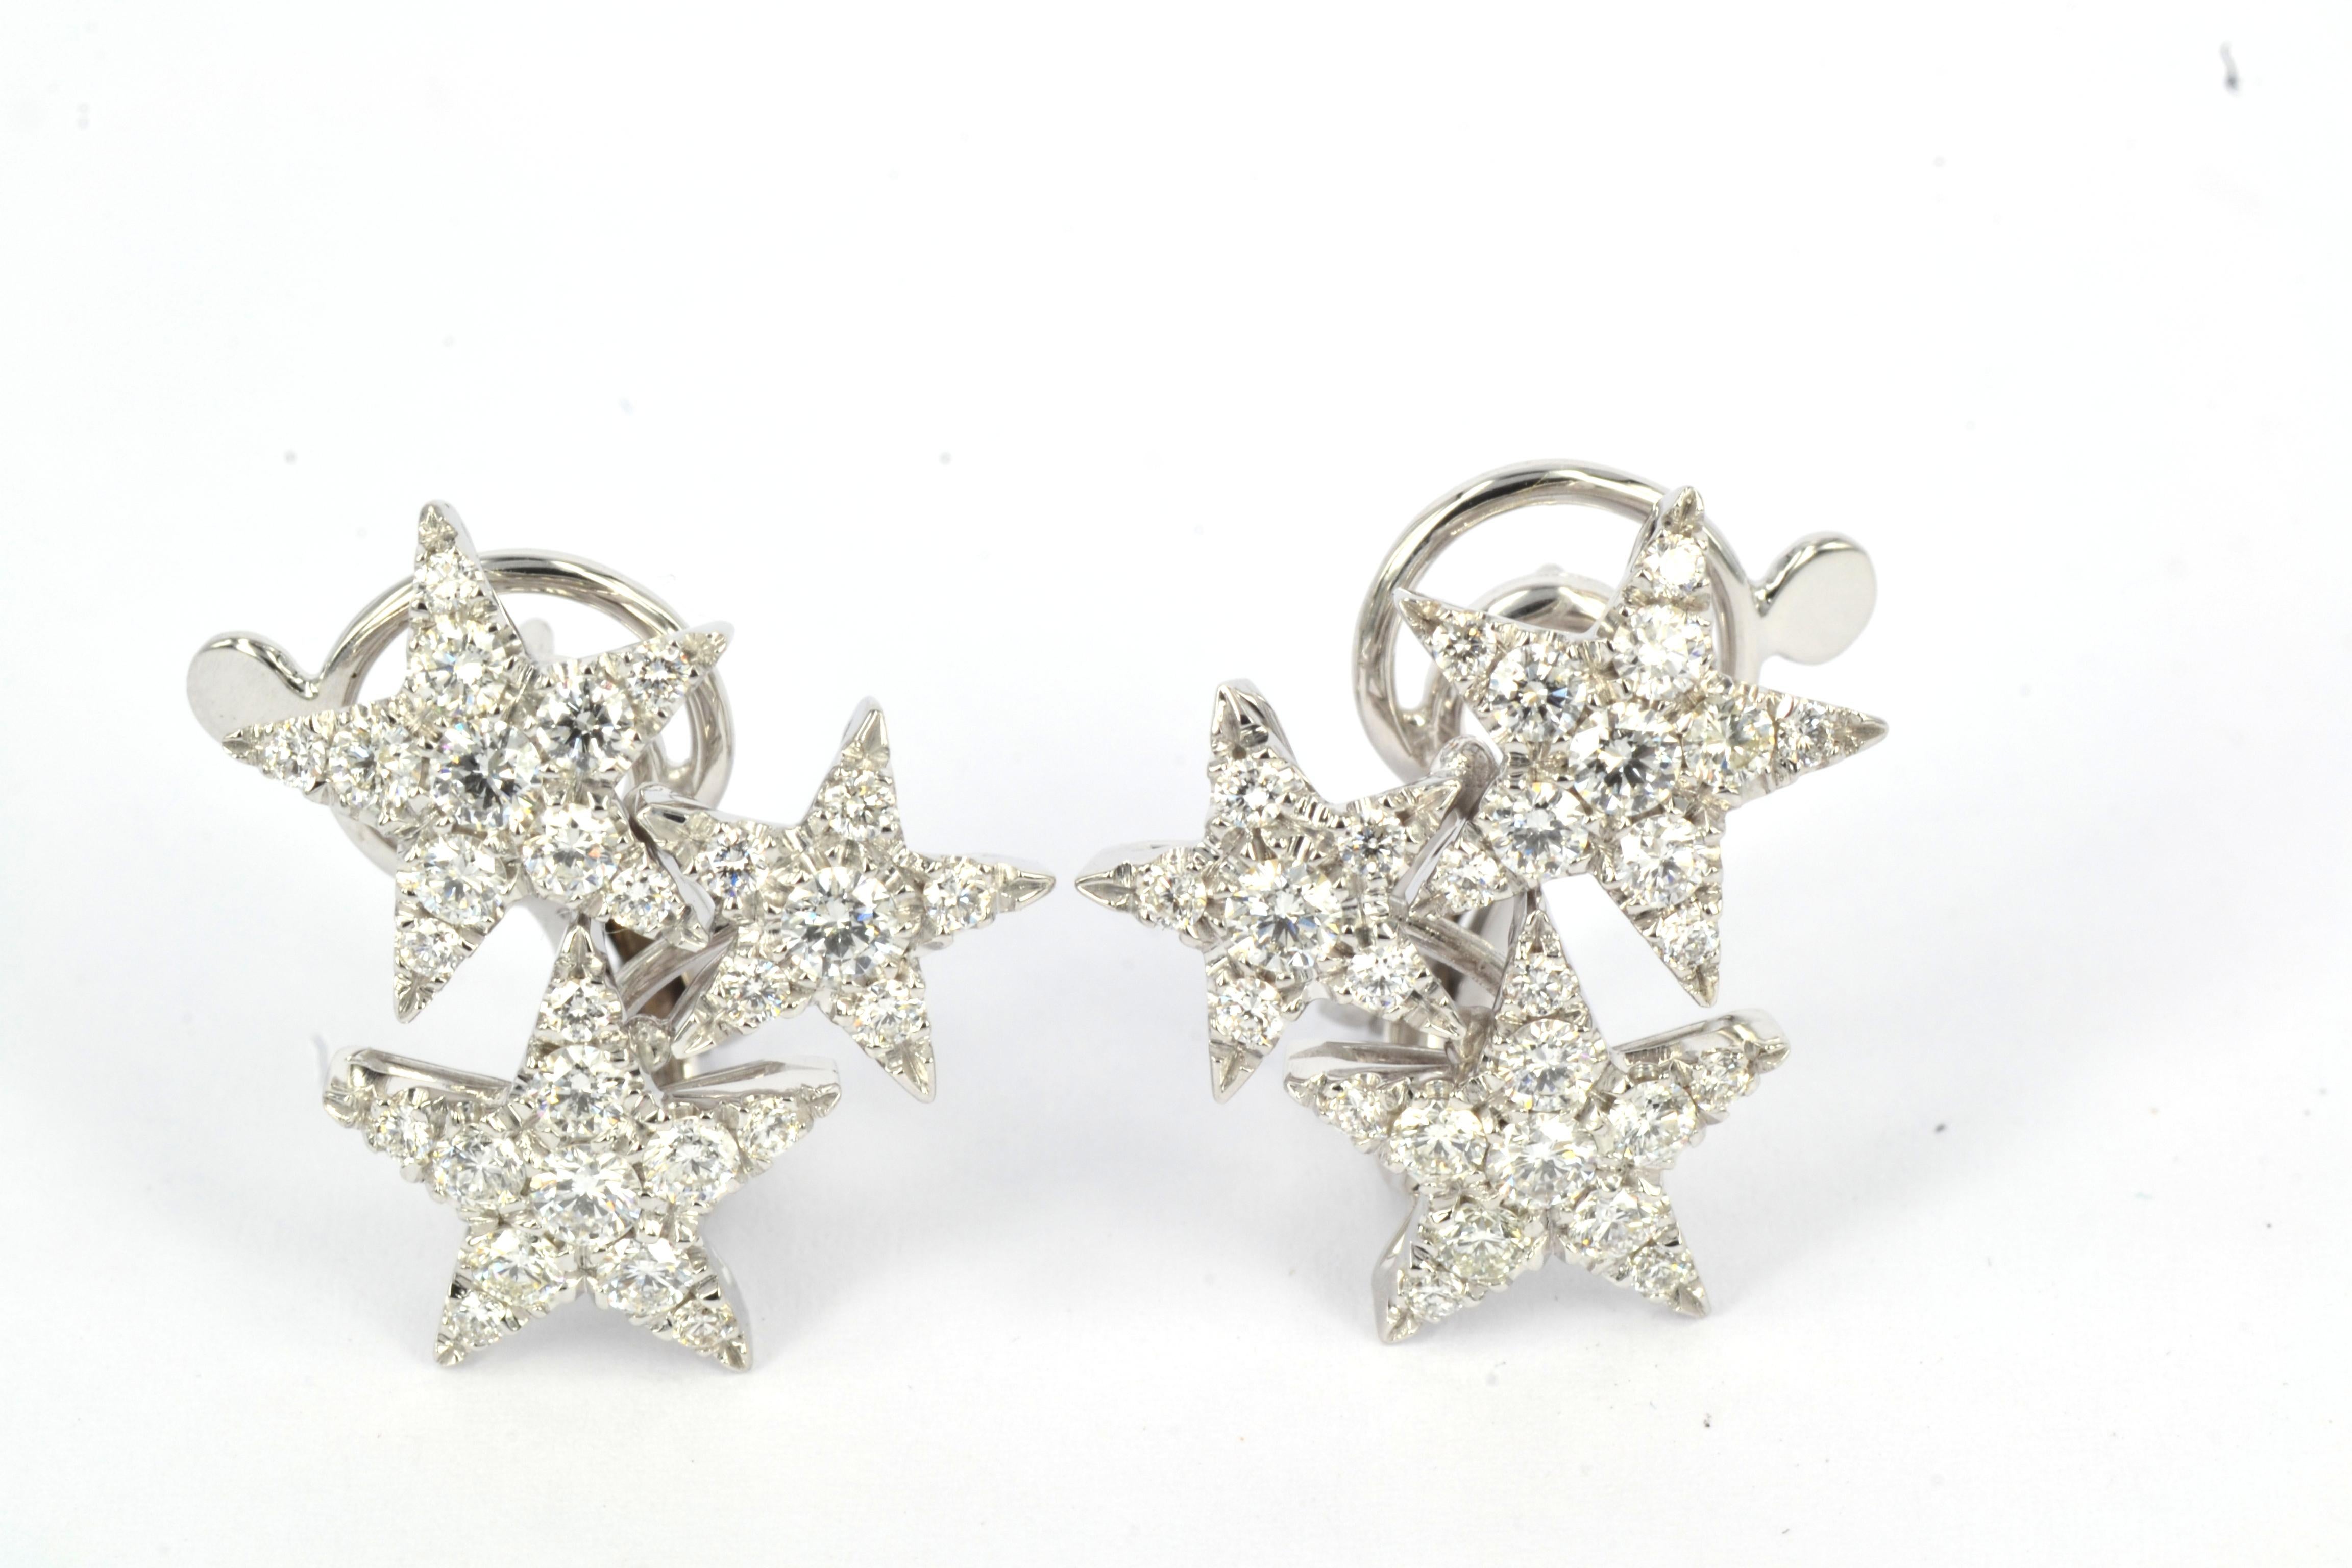 Three shining stars on each earrings design a cool, stilish and evergreen pair of earrings.
Beautifully handmade they feature fitting and quite big clips helping a good  wearability.
In case of unpierced earrings we can remove the fitting.
Light and